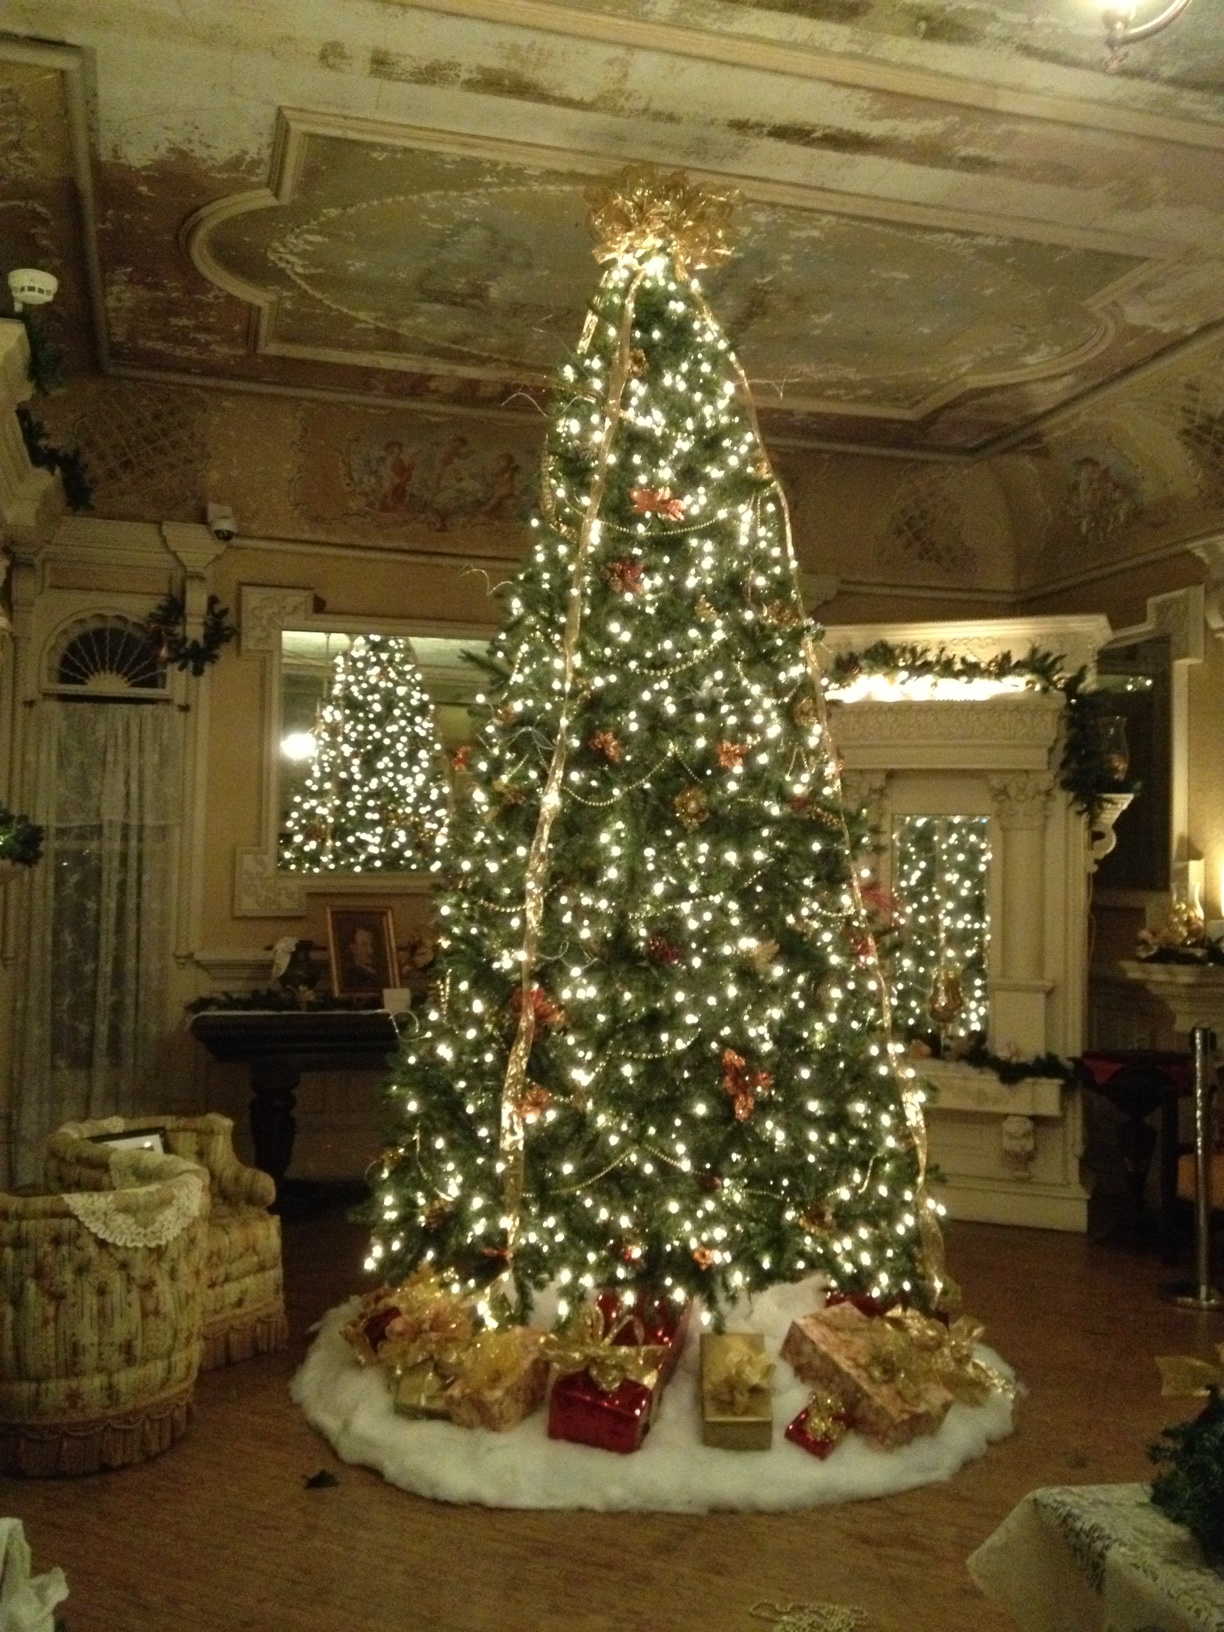 Christmastime in the Reception Room